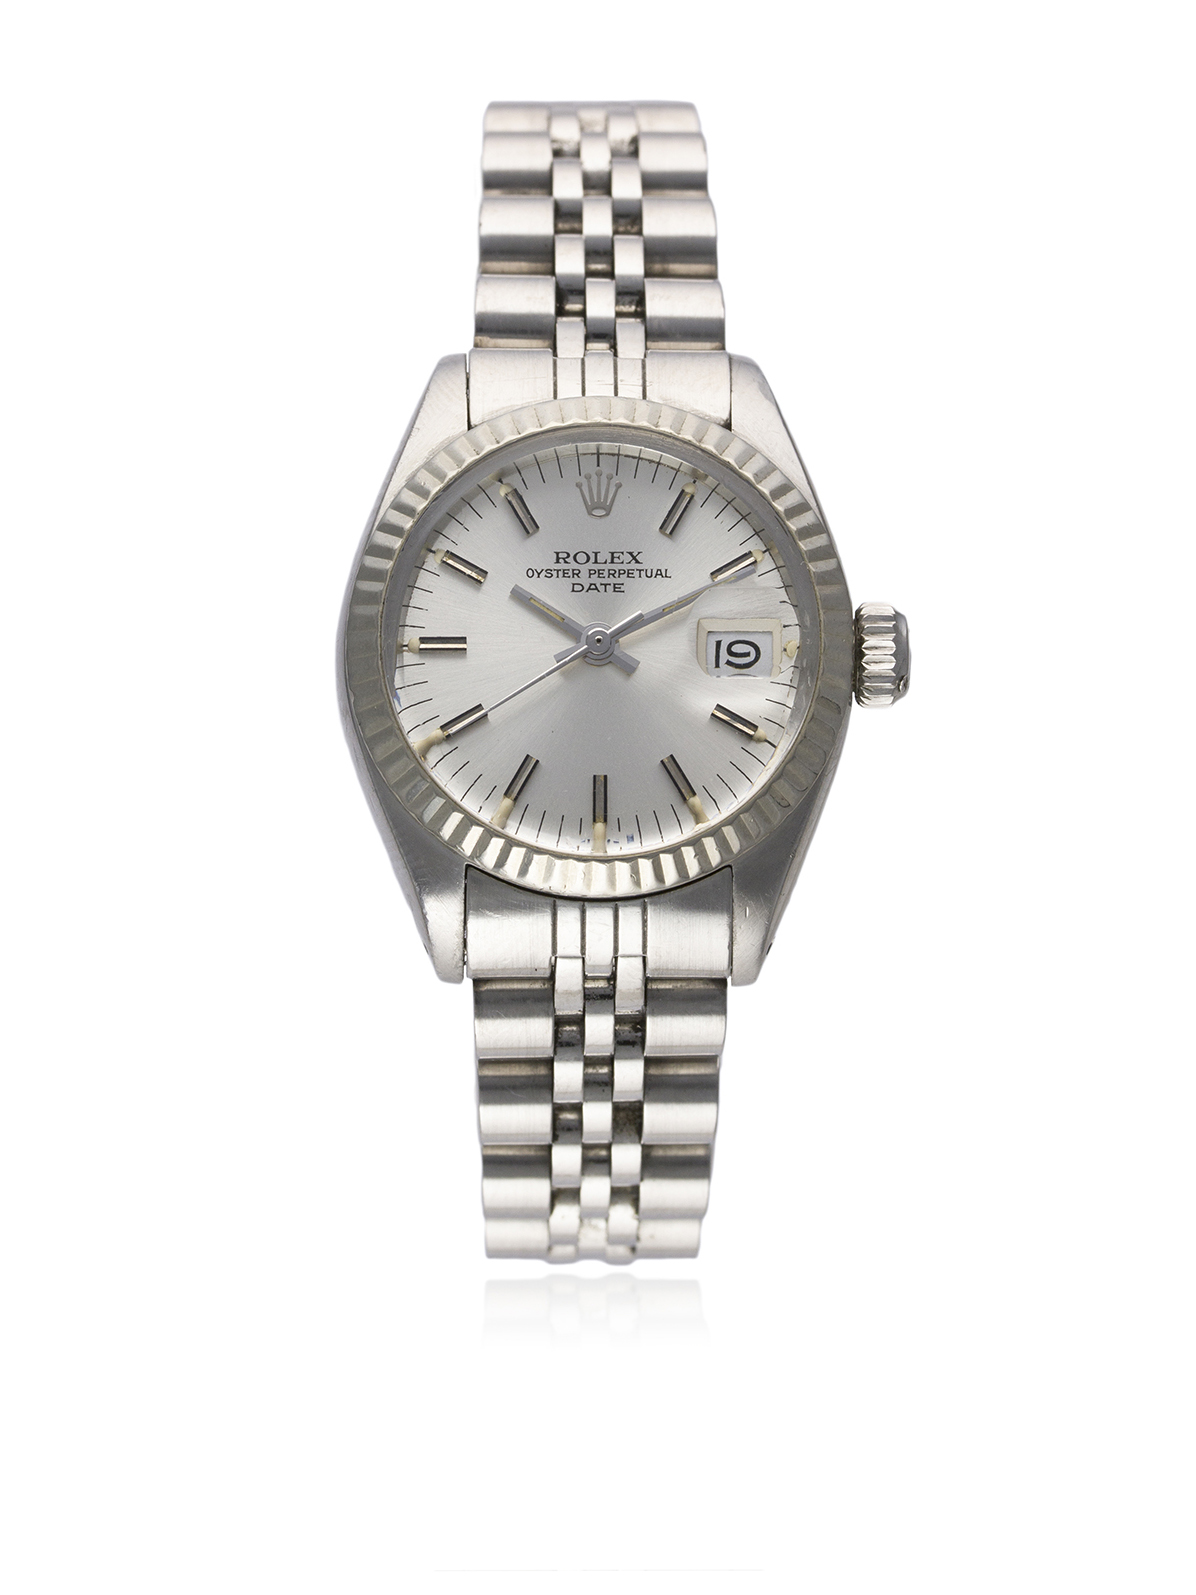 A LADIES STEEL & WHITE GOLD ROLEX OYSTER PERPETUAL DATE BRACELET WATCH CIRCA 1979, REF. 6917 D: